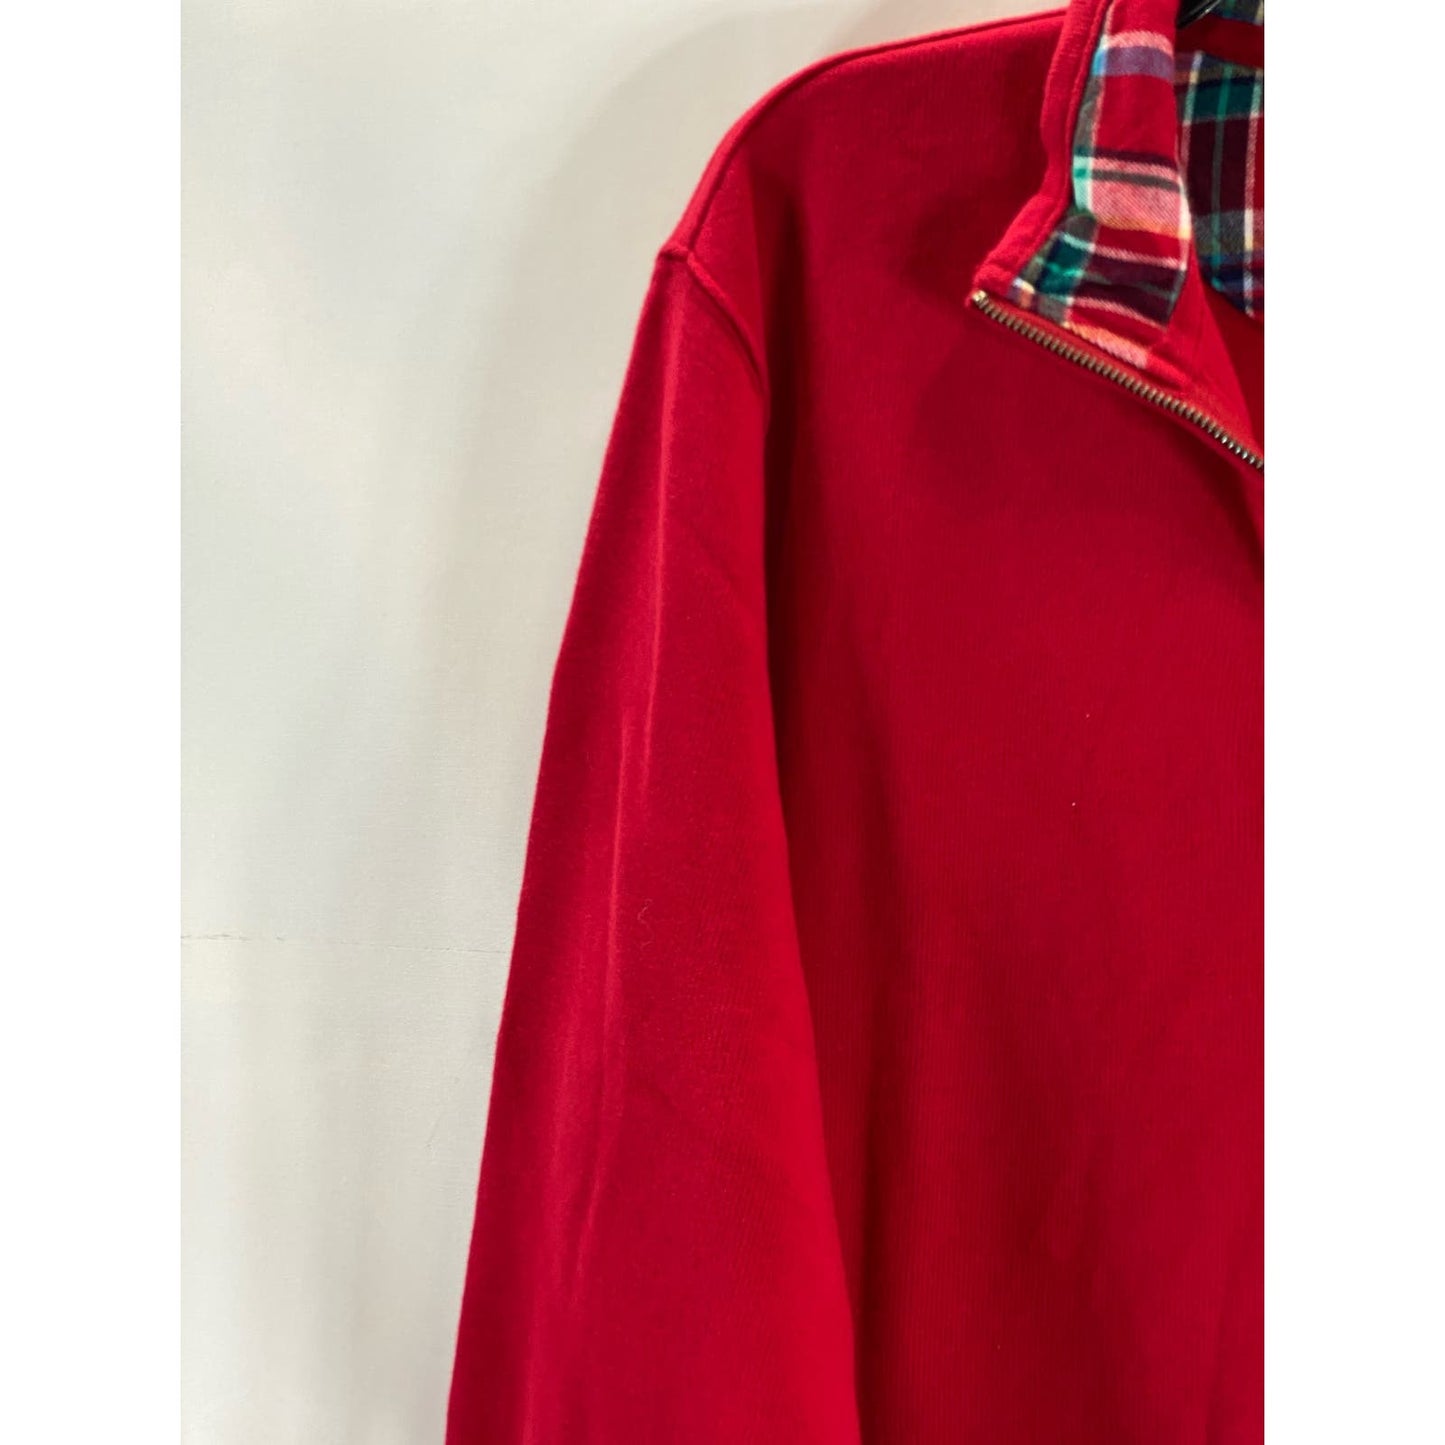 LANDS' END Men's Red Quarter-Zip Plaid Stand Collar Pullover Ribbed Sweater SZXL